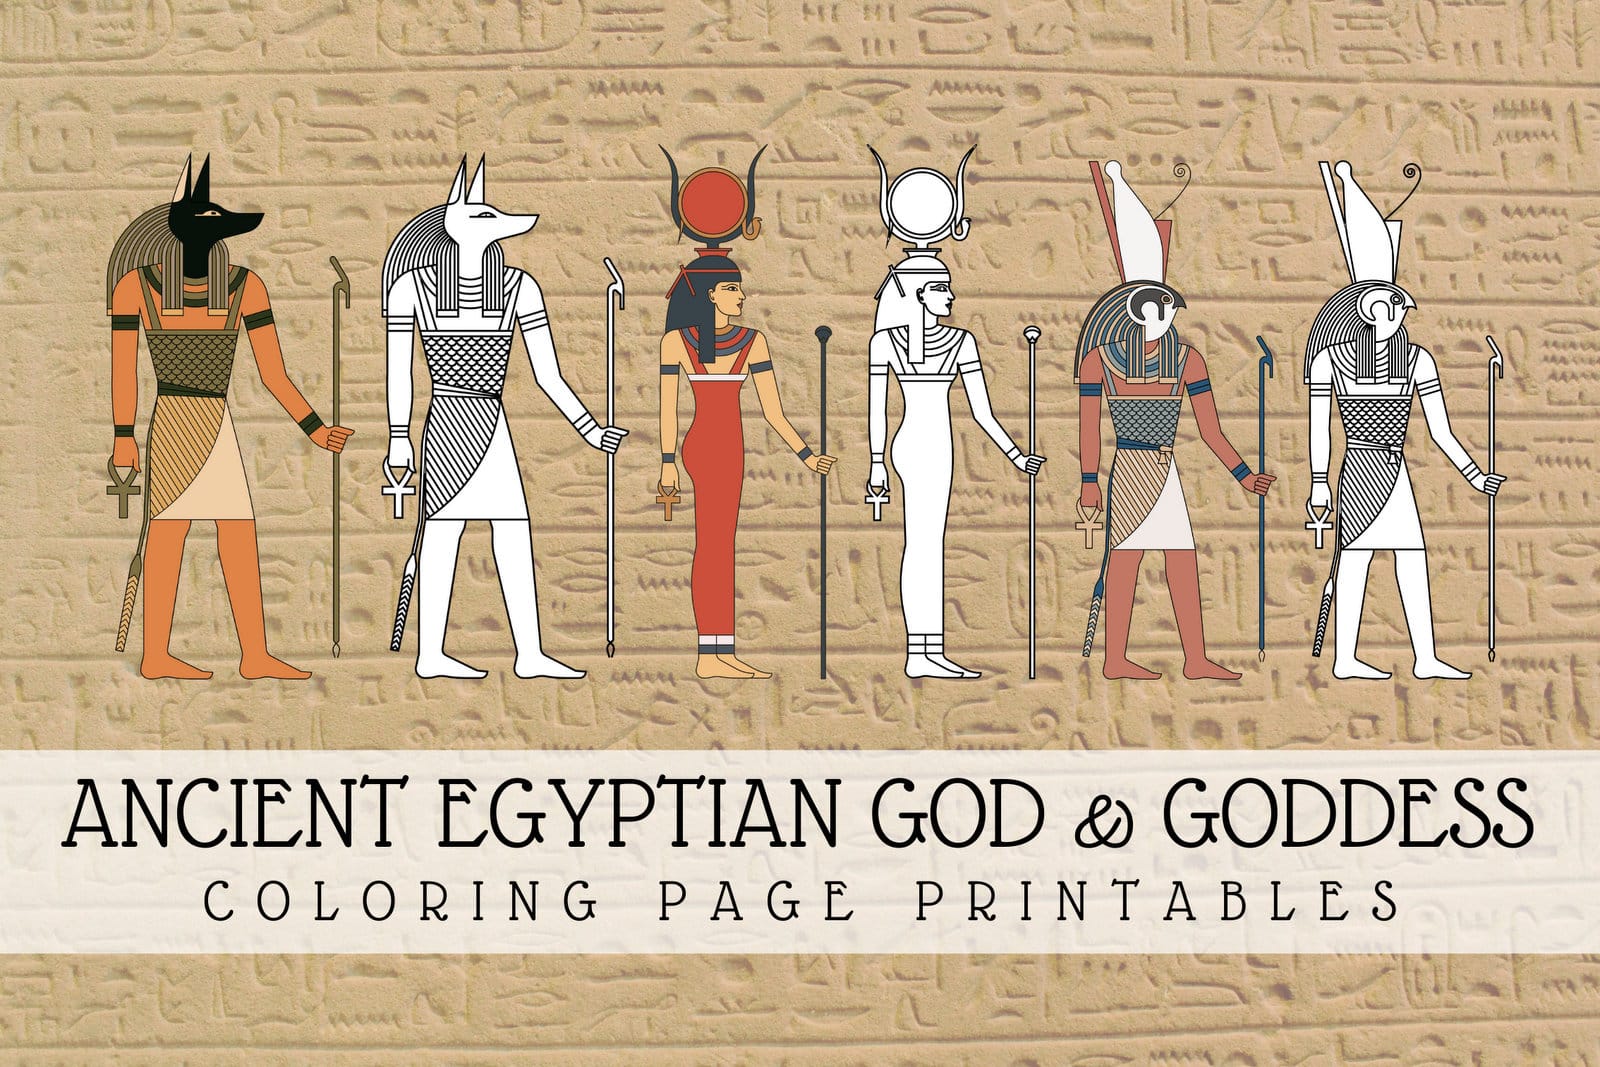 Ancient Egyptian gods and goddesses coloring pages education and activities at Print Color Fun